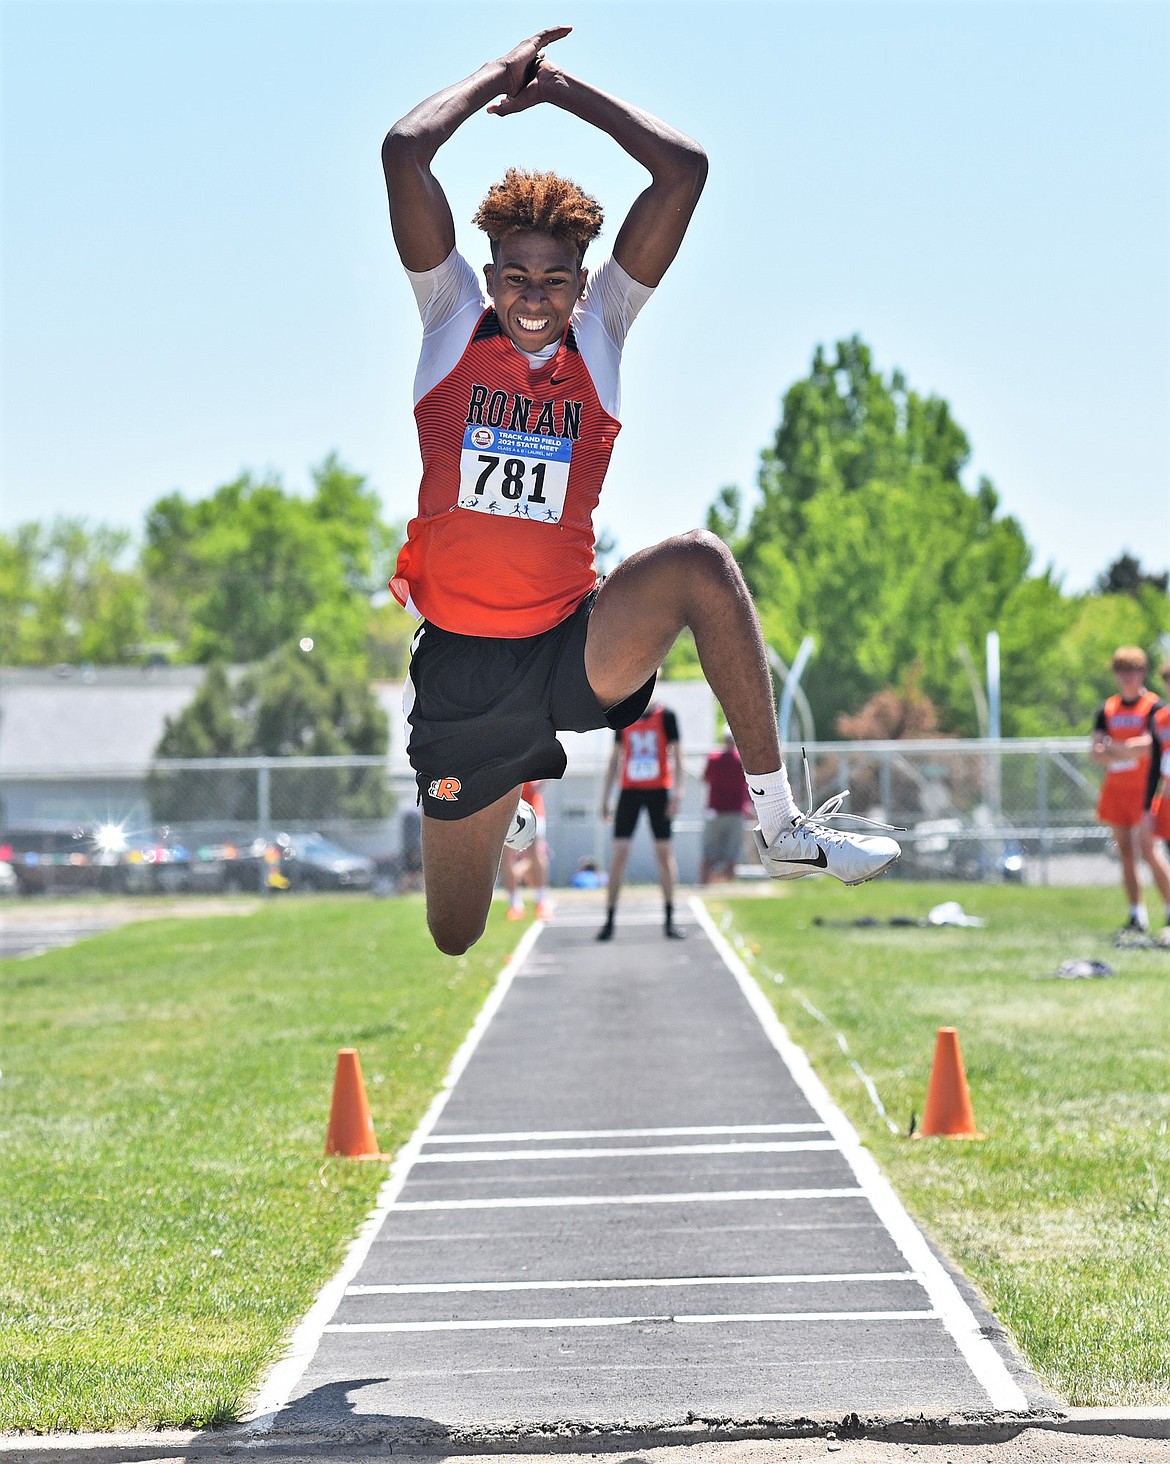 Ronan senior Girma Detwiler finished second in the triple jump at Laurel with a mark of 43-05.75. (Whitney England/Whitefish Pilot)